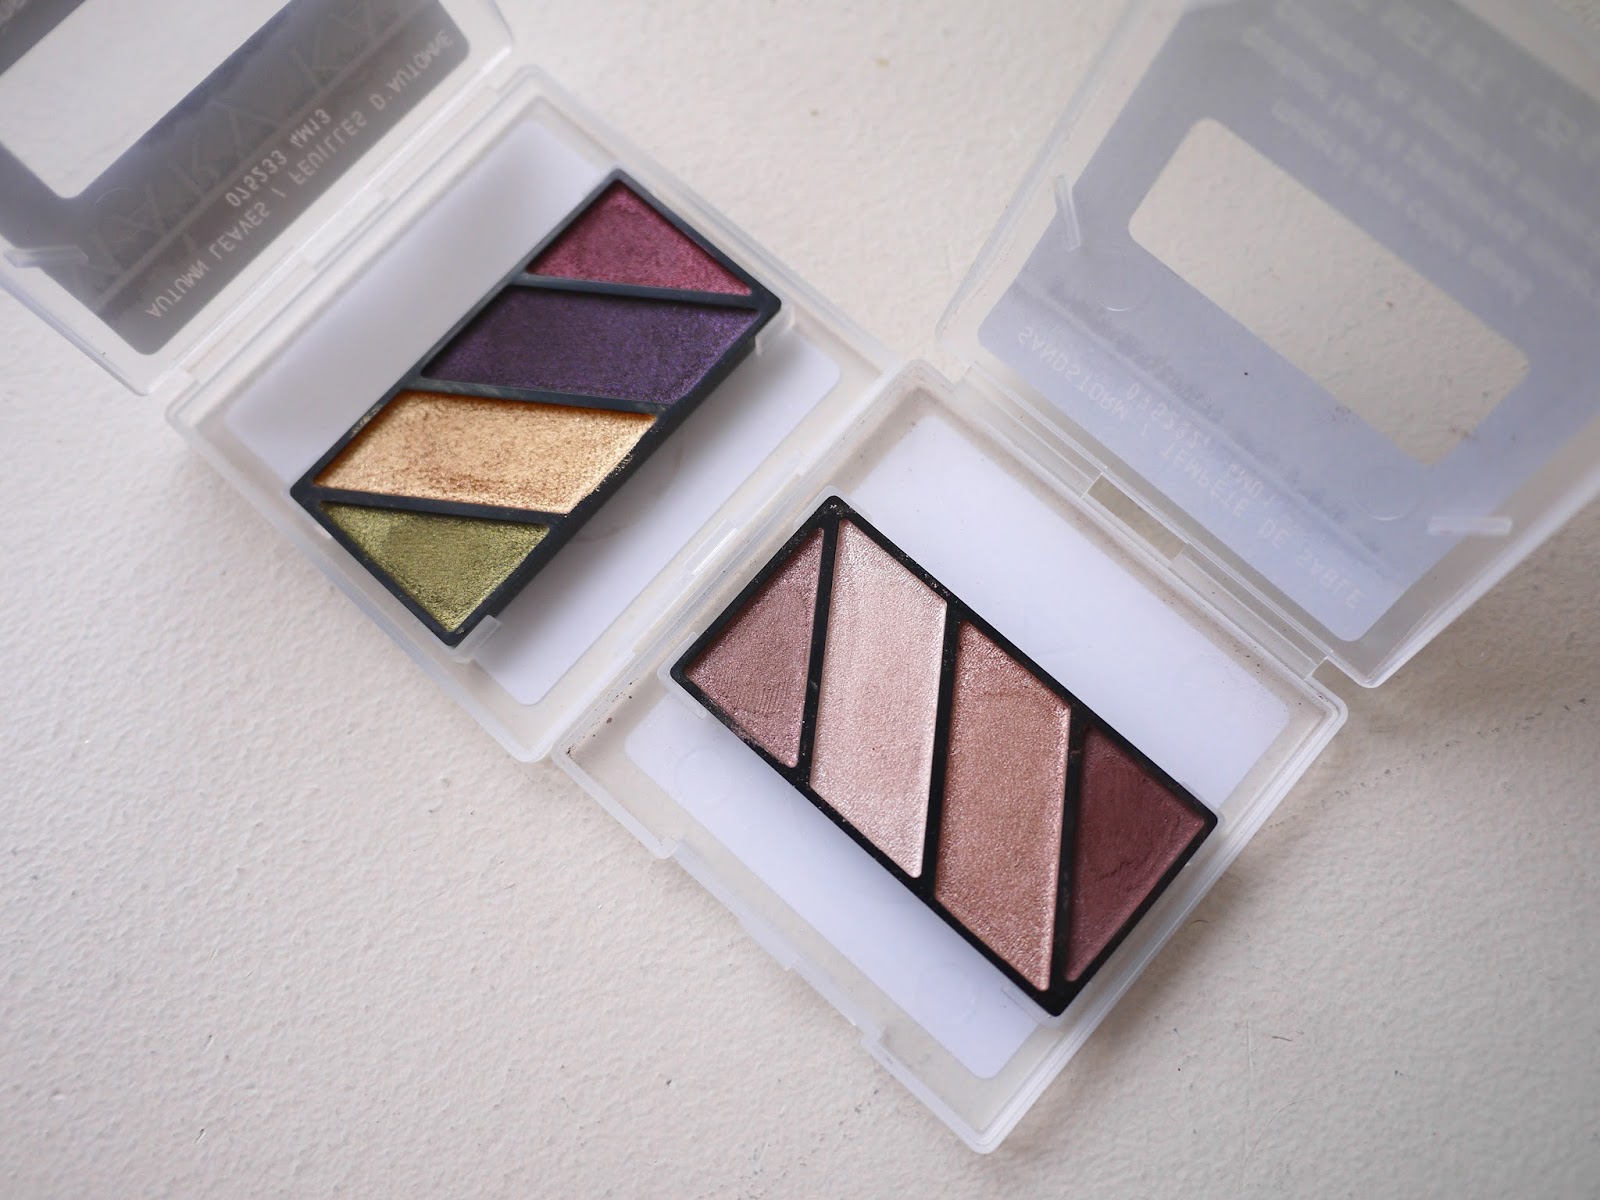 Mary Kay Autumn Leaves and Sandstorm Quad Review swatches